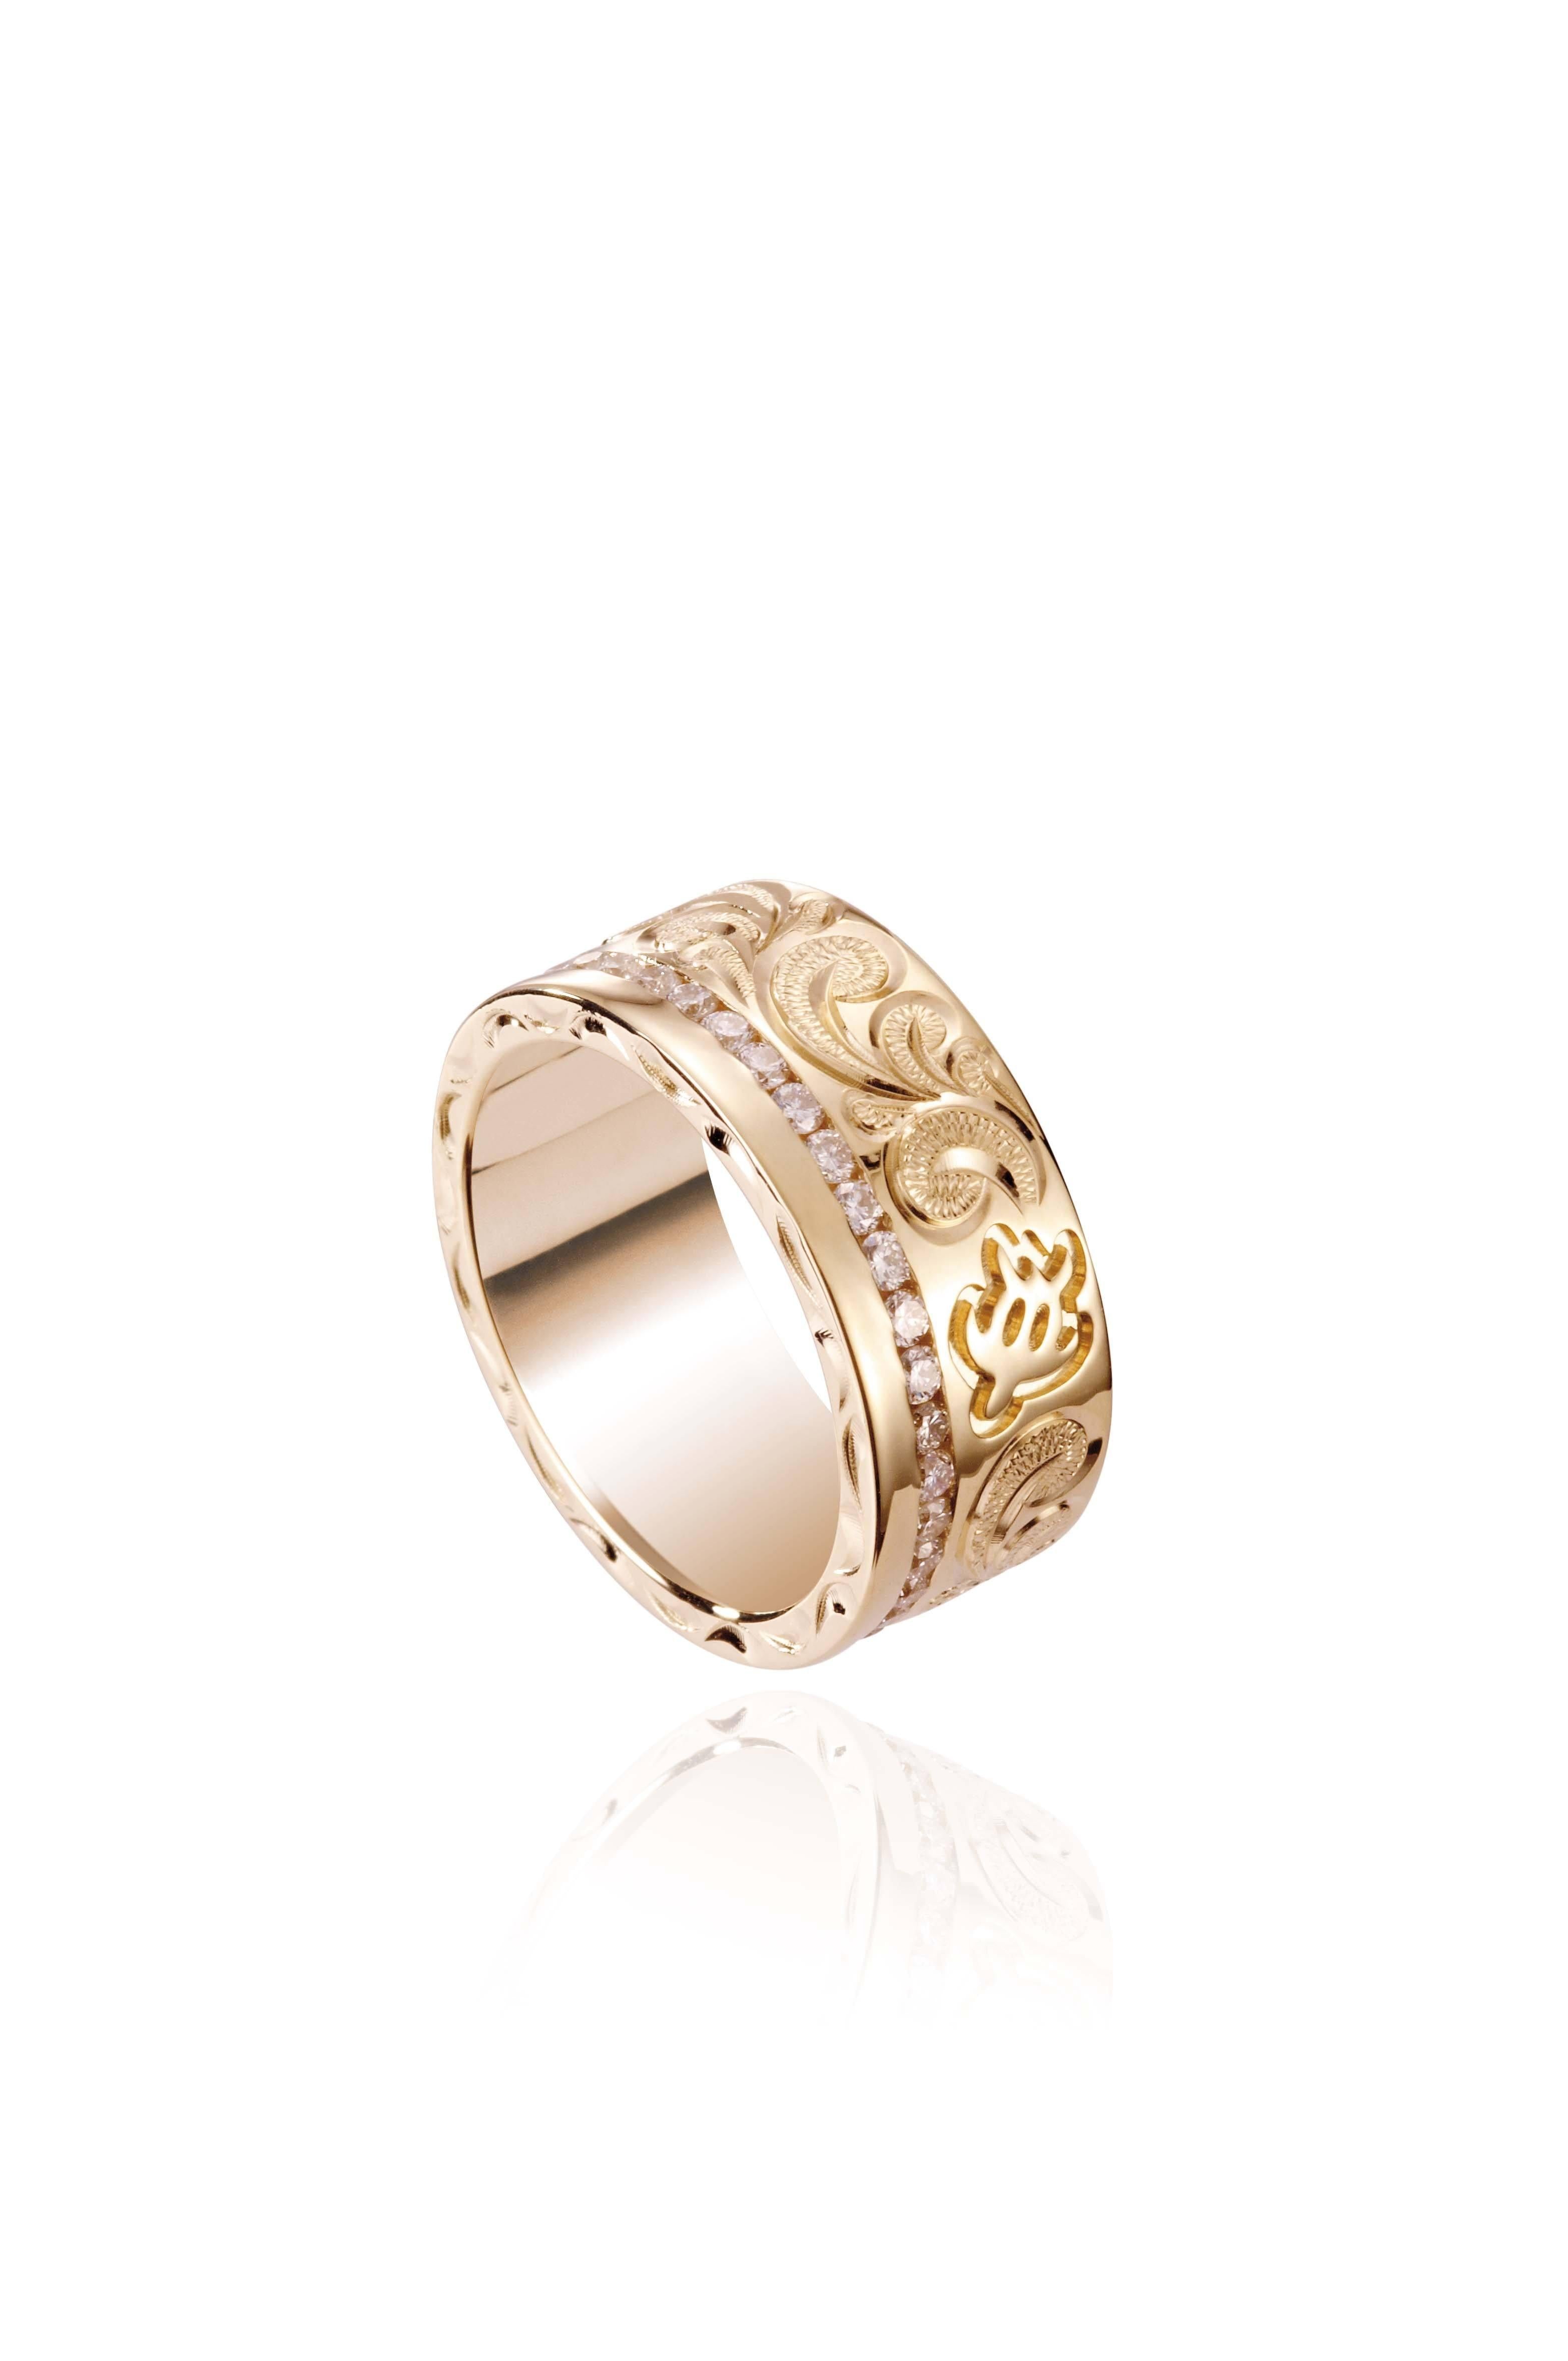 The picture shows a 14K yellow gold diamond Channel 8 mm ring with hand-engravings, including a sea turtle.